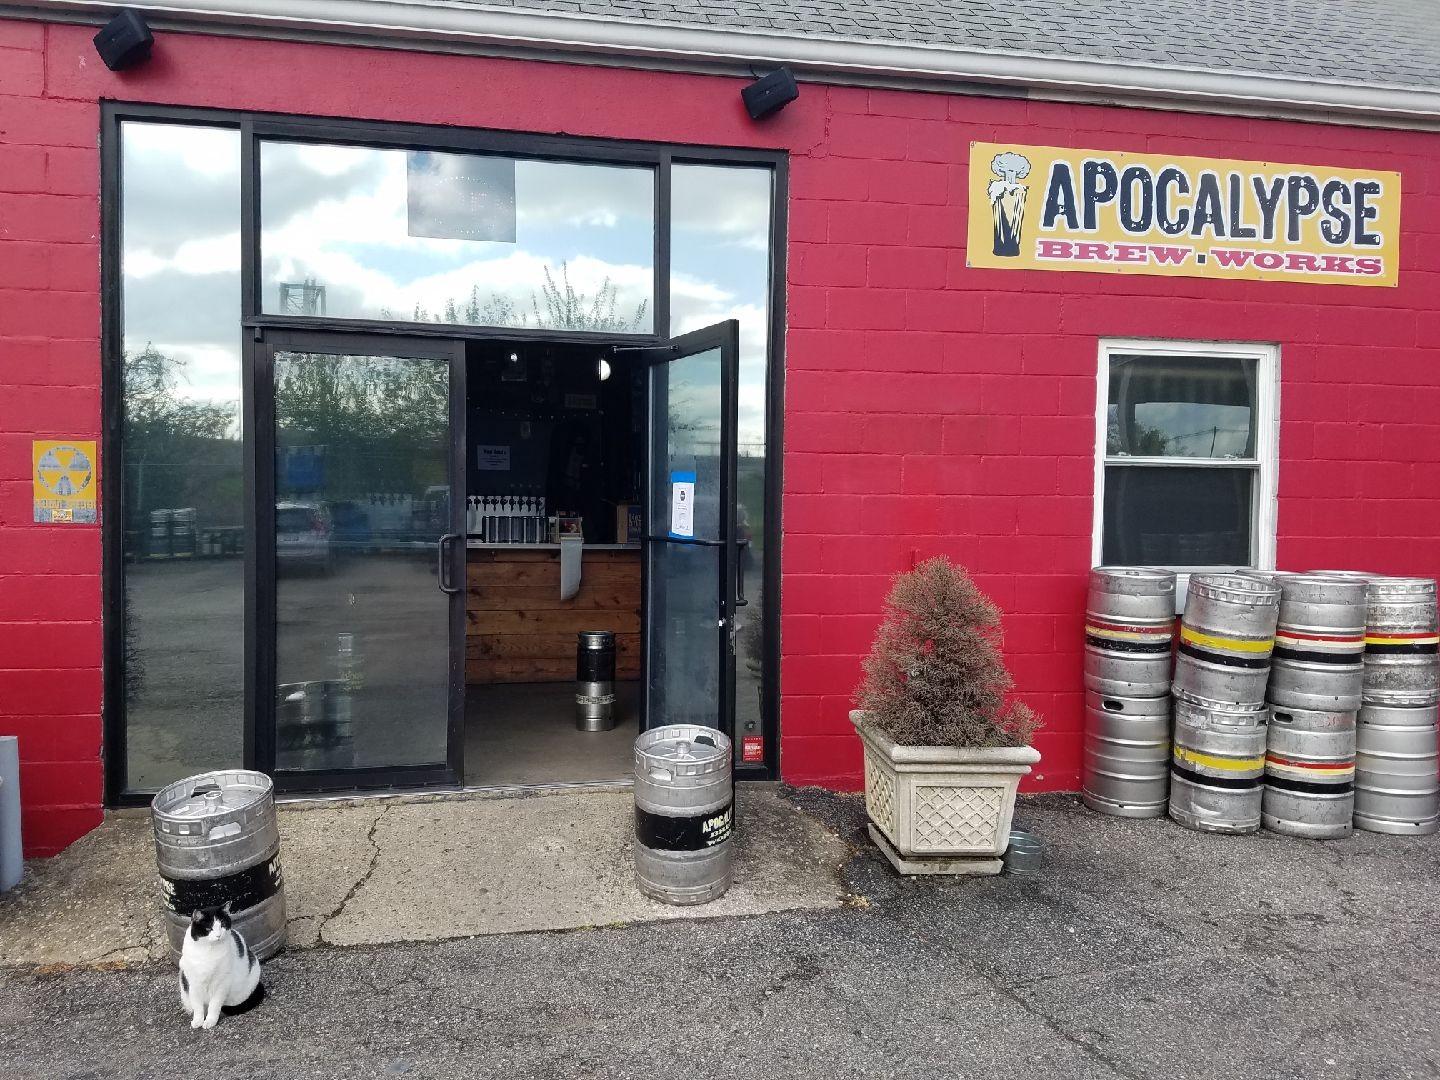 Saki, one of the two Apocalypse Brew Works cats, and social distancing setup. Photo provided by Apocalypse Brew Works.